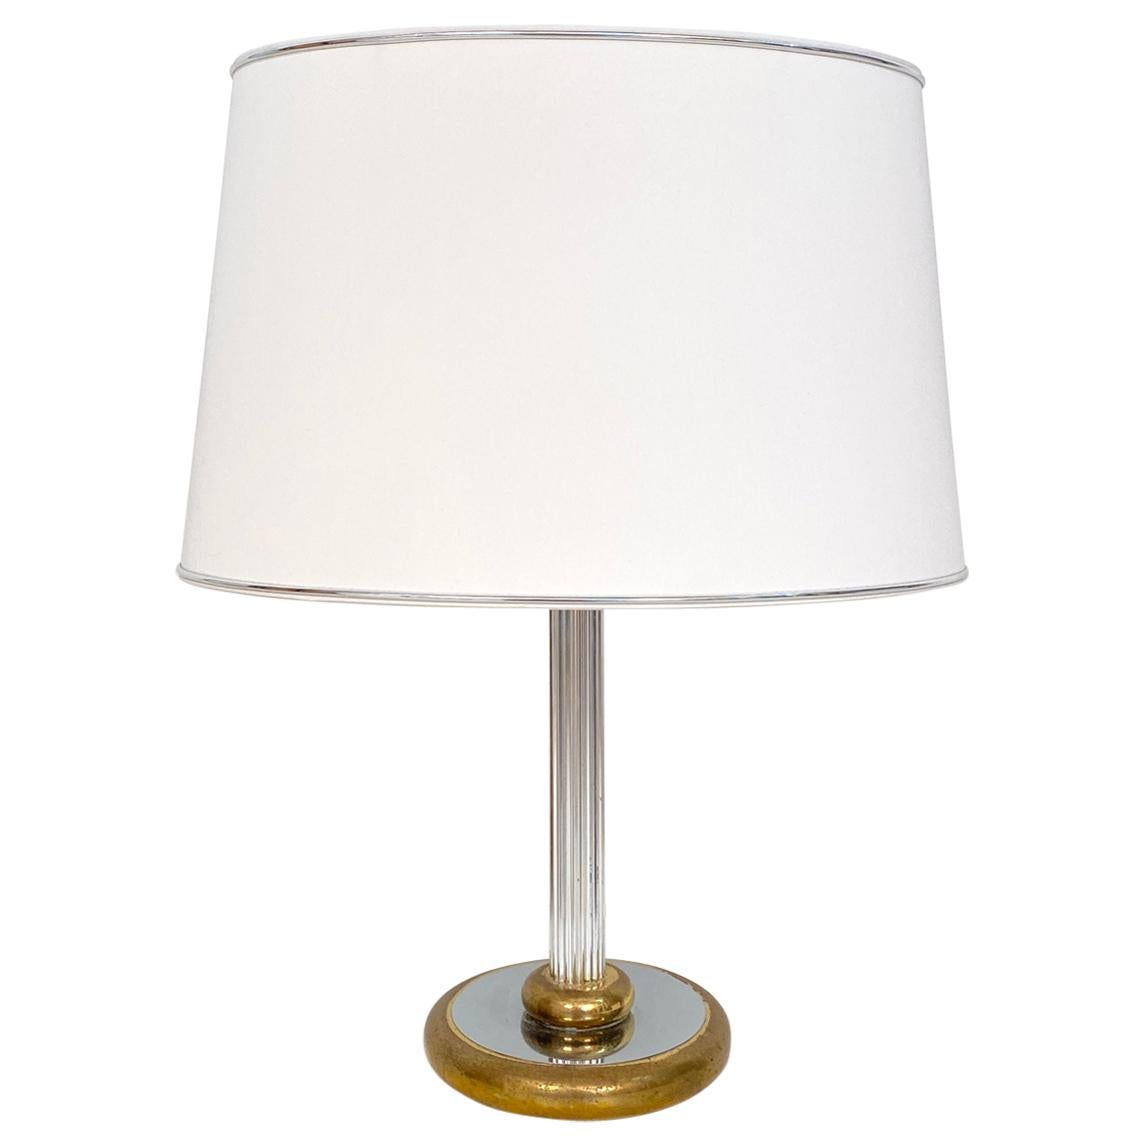 Midcentury German Table Lamp by Aro-Leuchte in Chrome and Brass, circa 1970 For Sale